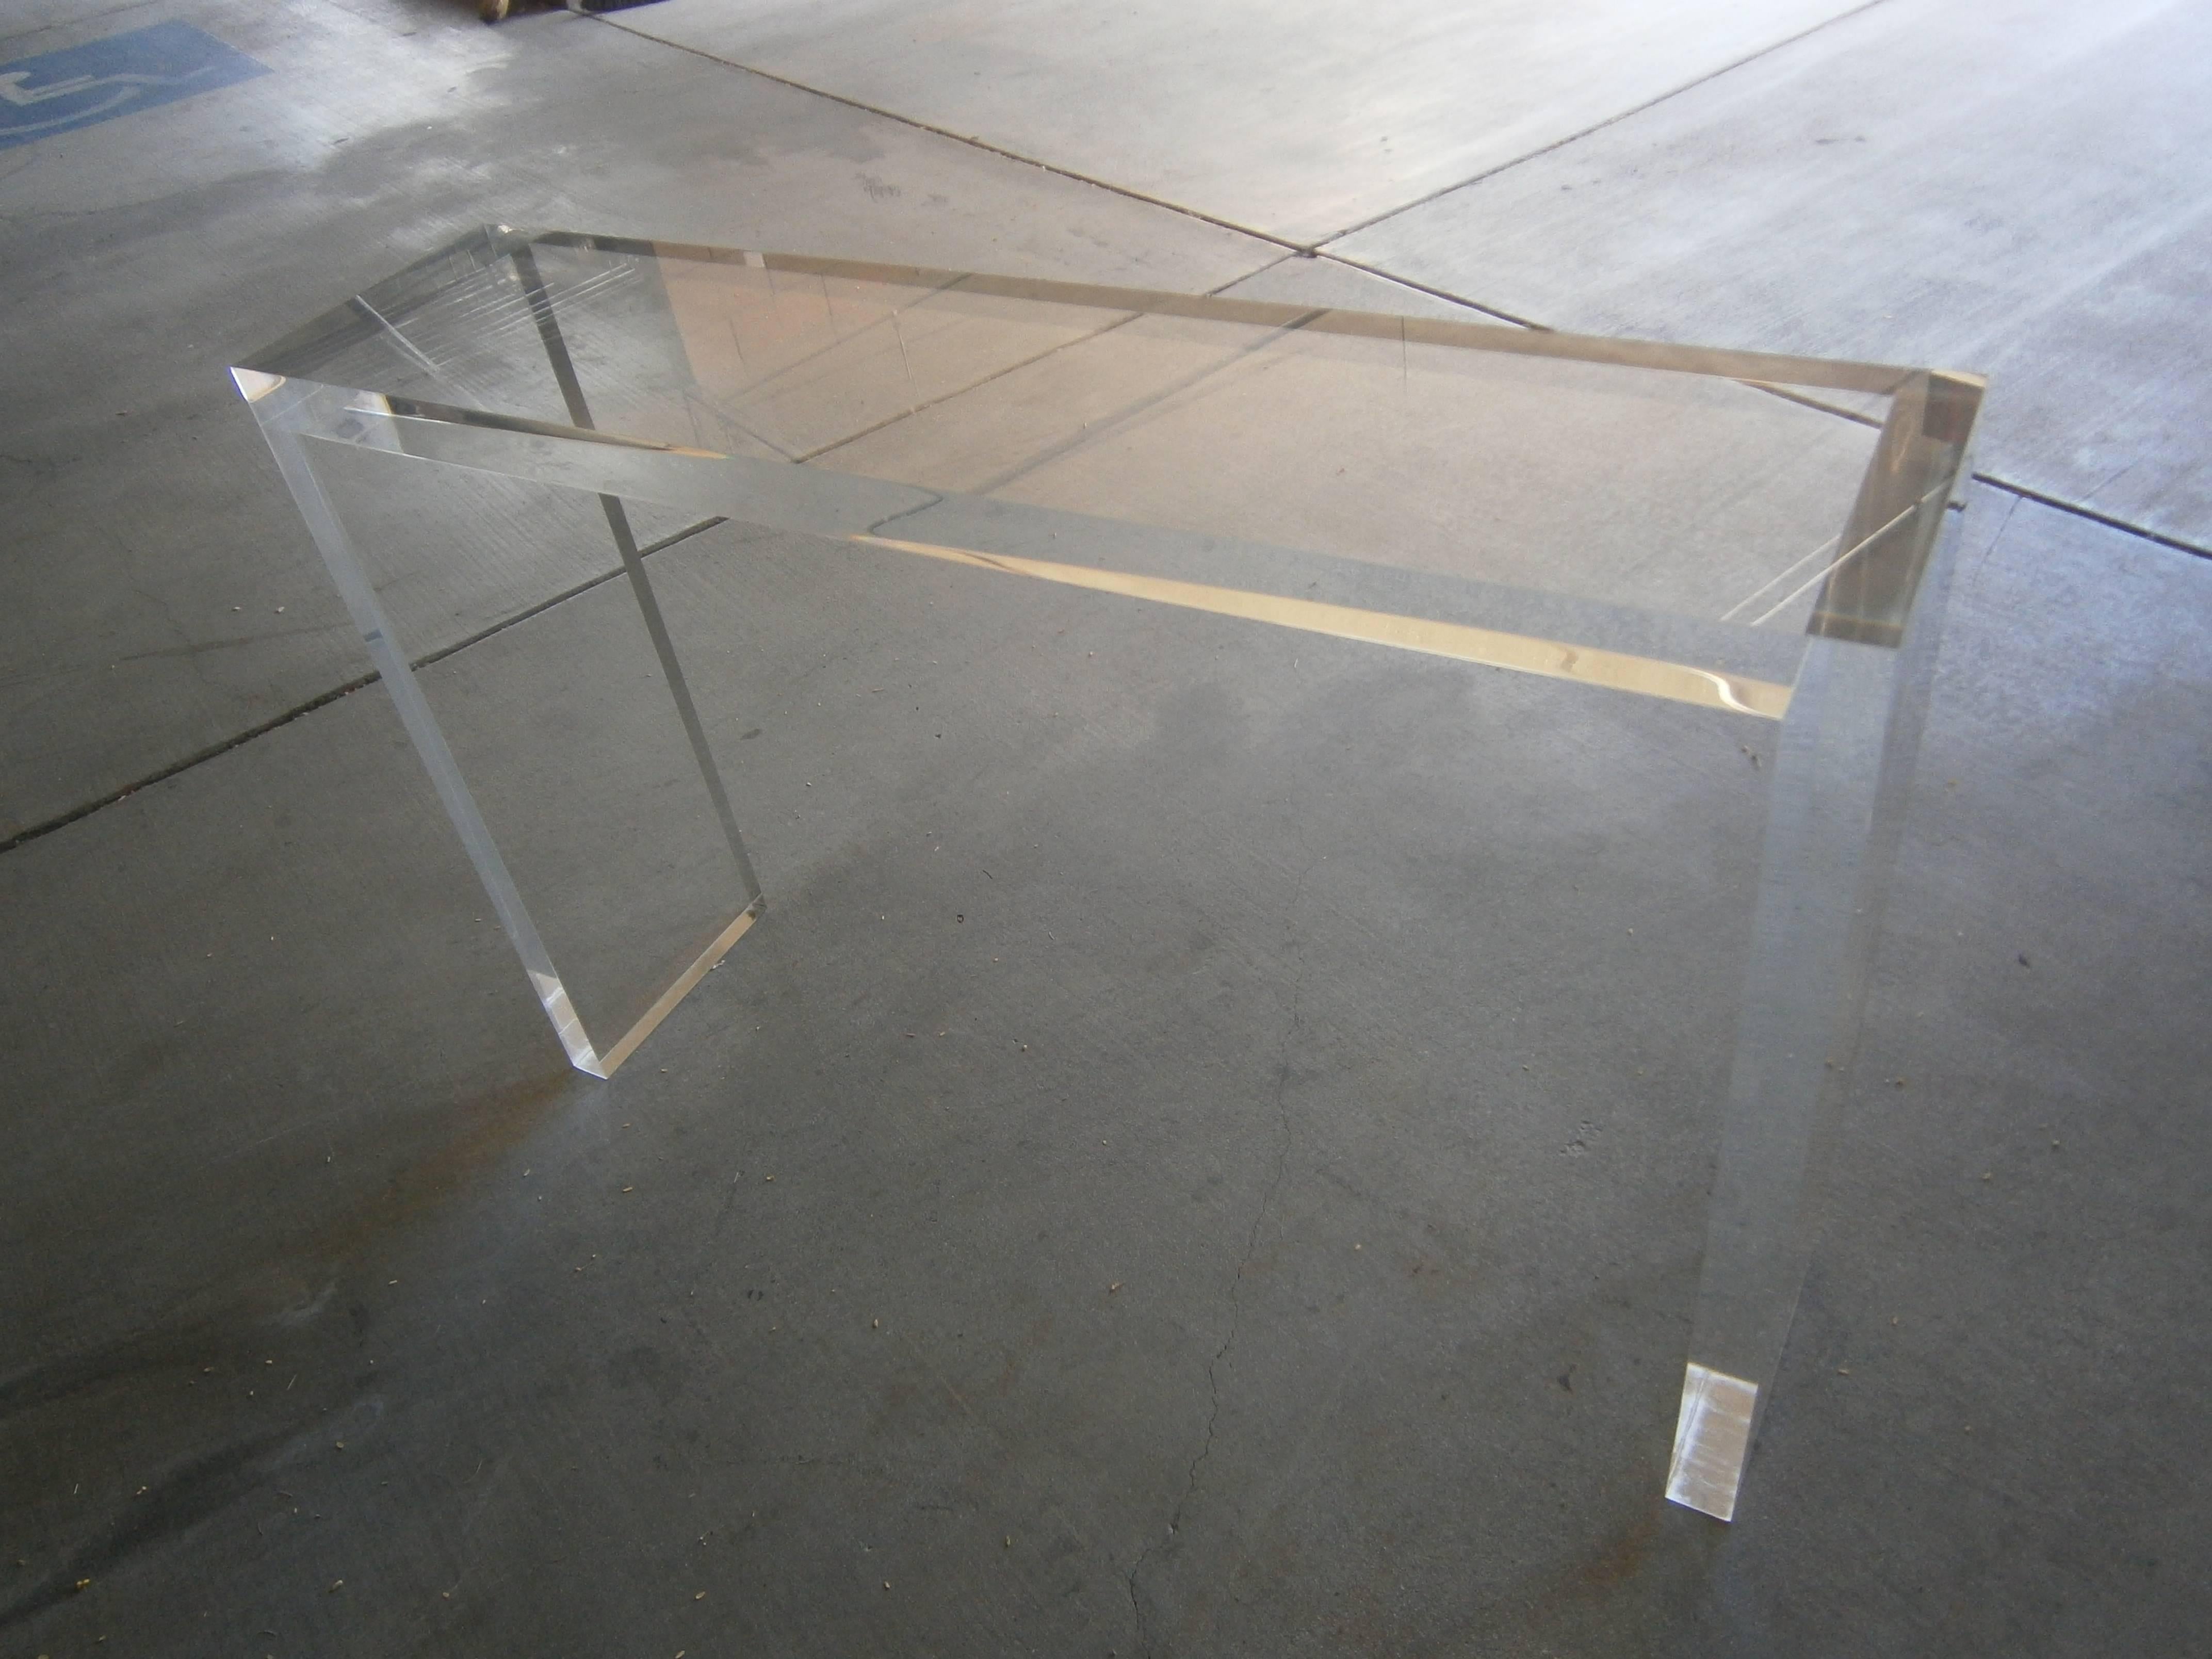 A sleek and shallow depth Minimalist console table manufactured by Carmichael Furniture. The table is made from 2